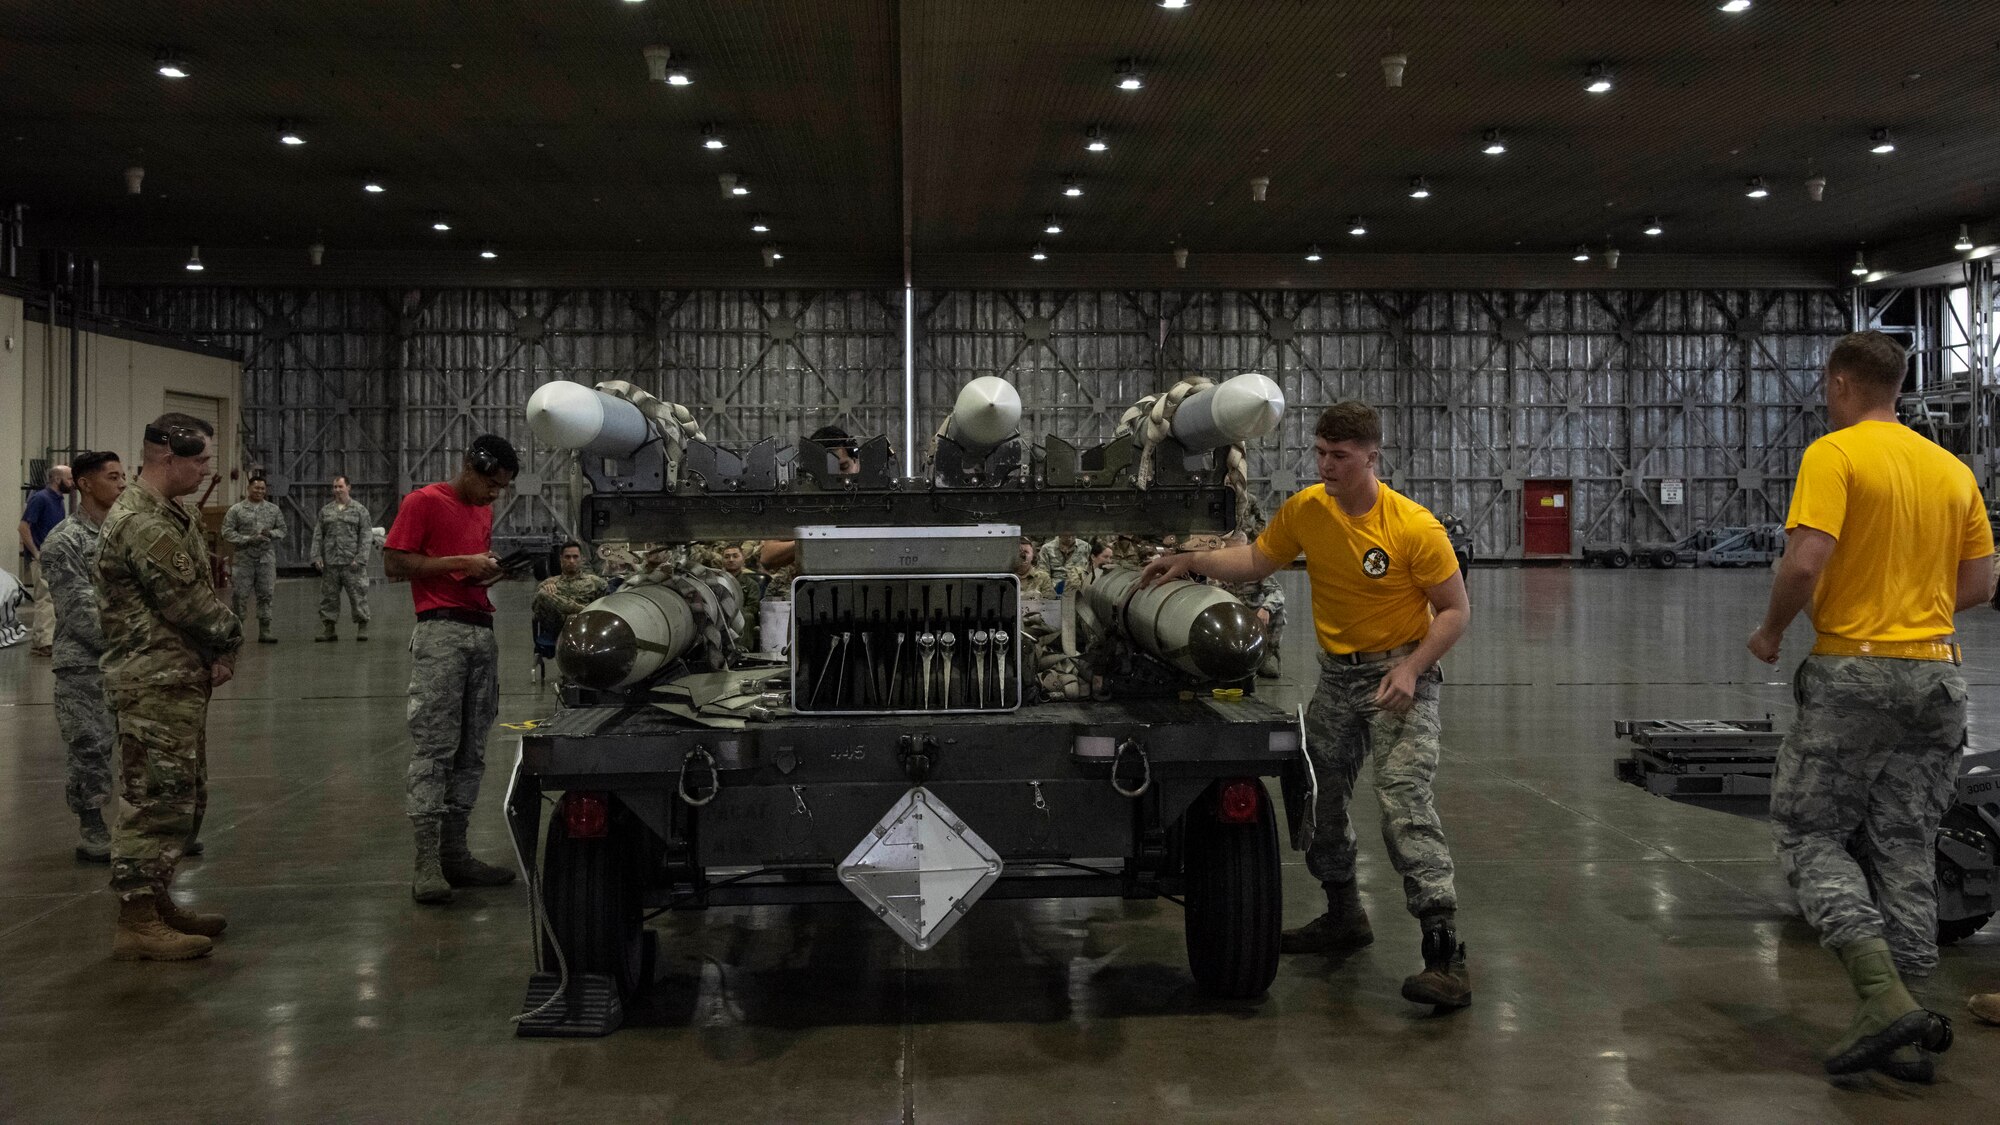 Airmen with the 13th and 14th Aircraft Maintenance Unit inspect inert munitions during the third quarter load competition at Misawa Air Base, Japan, Oct. 25, 2019.Weapon technicians evaluate participants on various aspects such as safety, accuracy, tool accountability and dress and appearance. The competition tested the ability of Airmen to quickly and precisely carry out the mission of power projection in the Indo- Pacific region. (U.S. Air Force photo by Airman 1st Class China M. Shock)